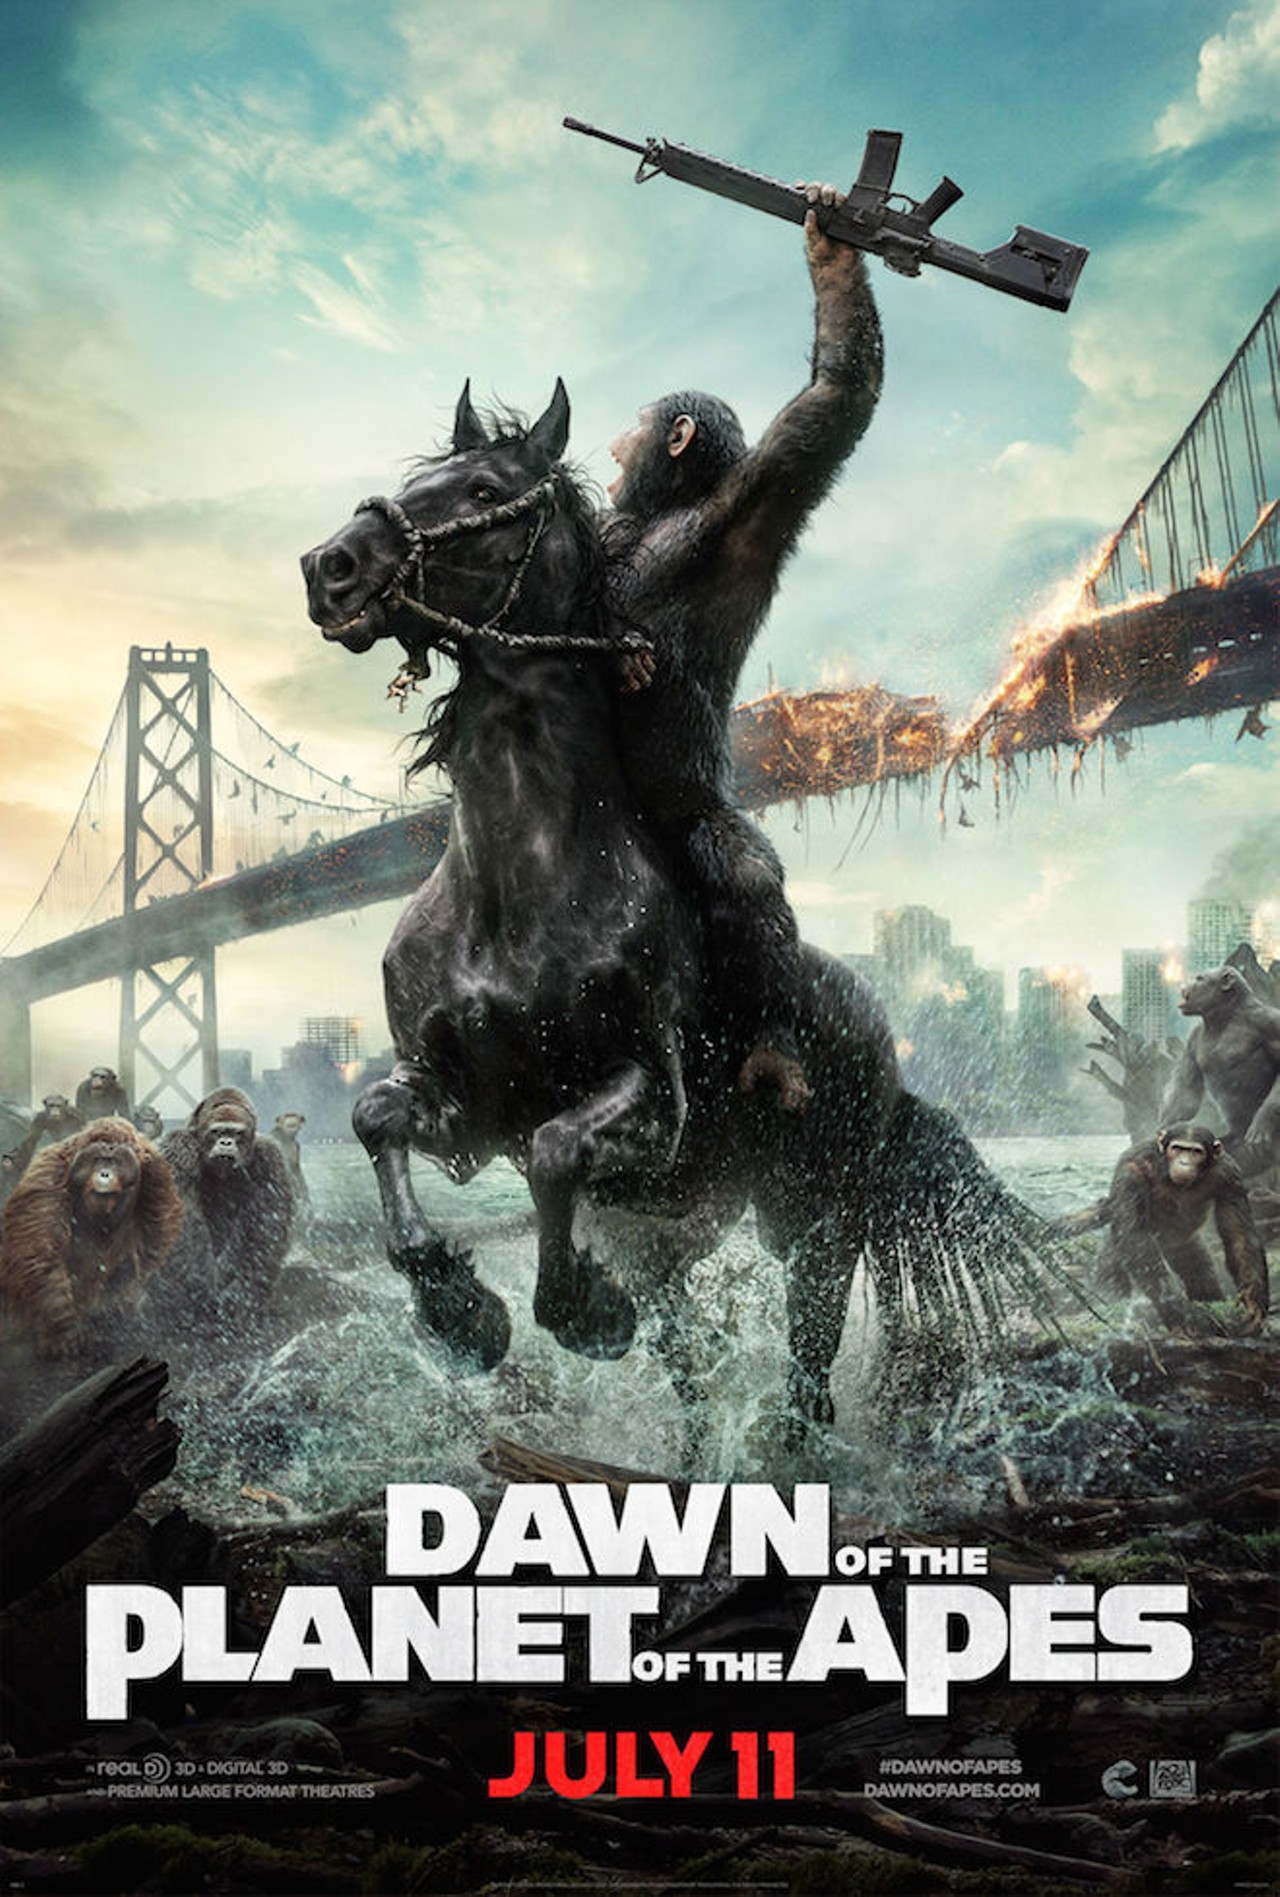 Opens Friday, July 11Dawn of the Planet of the Apes